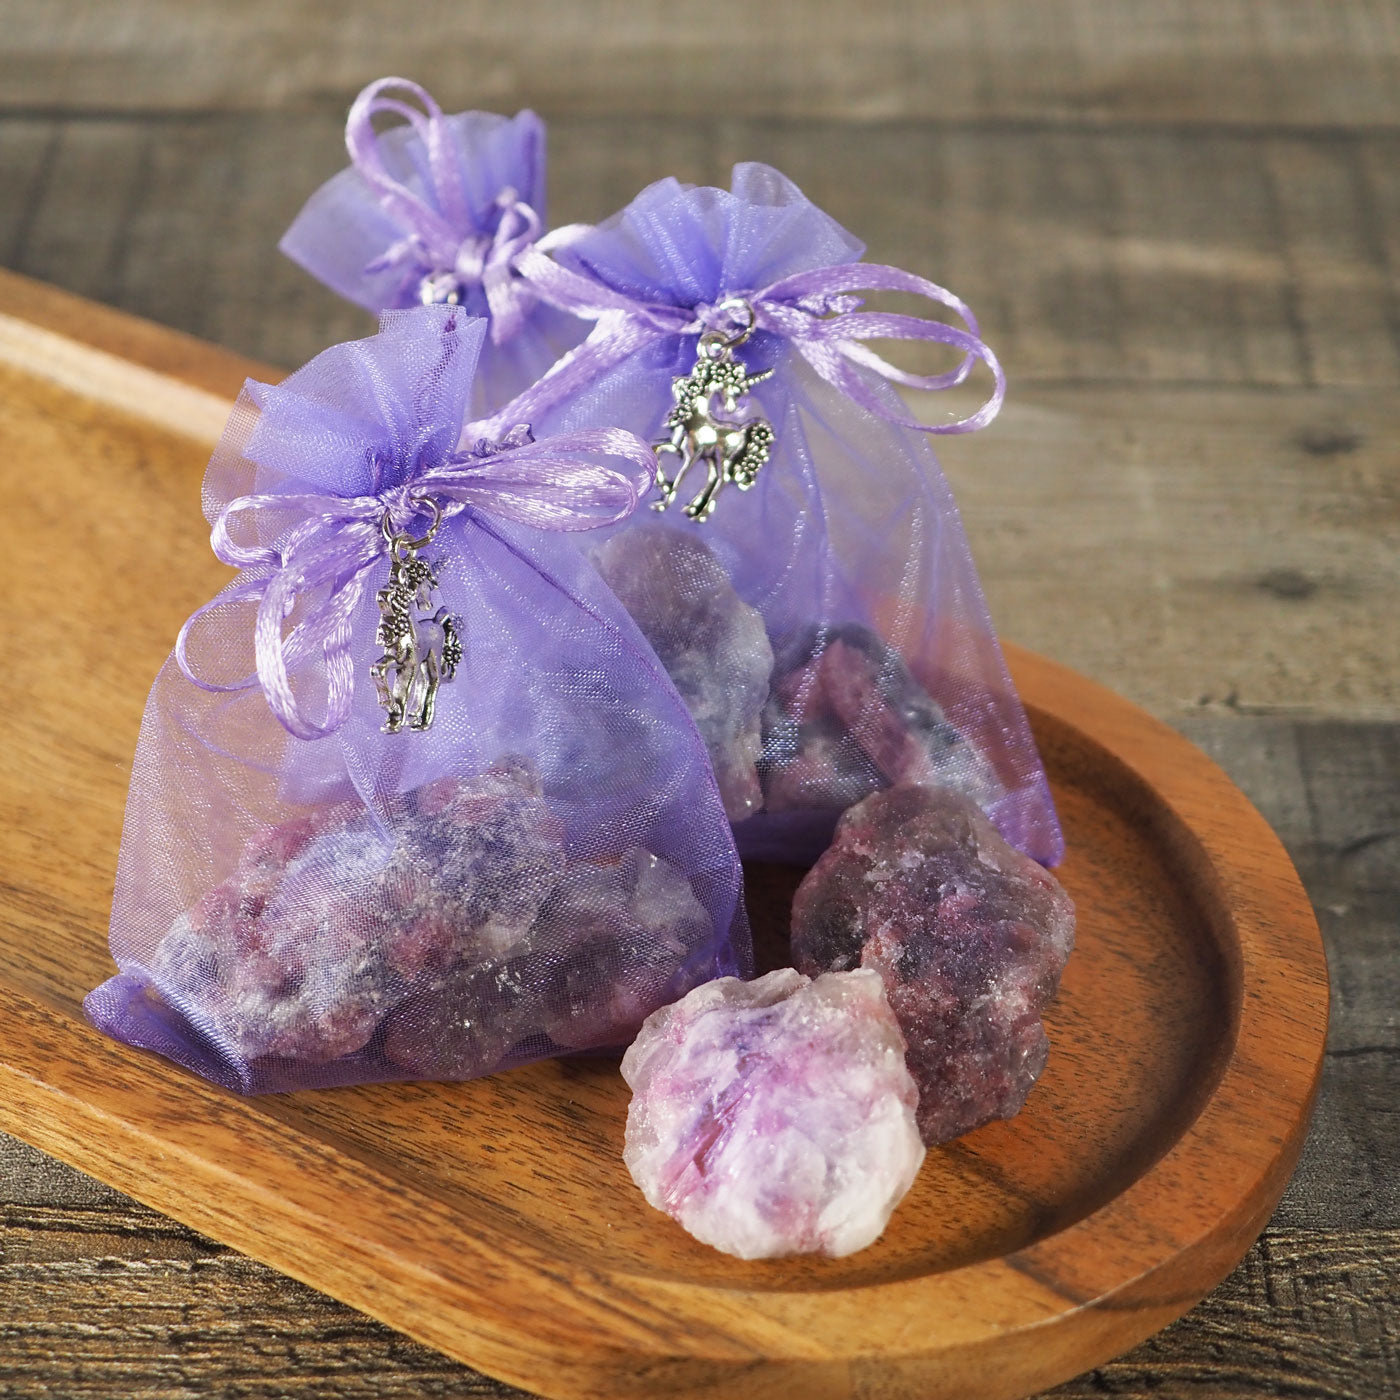 3 Small Purple Organza Sacks tied with a Unicorn Charm, each containing 2 Rough Unicorn Stones, Shown with 2 Rough Unicorn Stones beside them